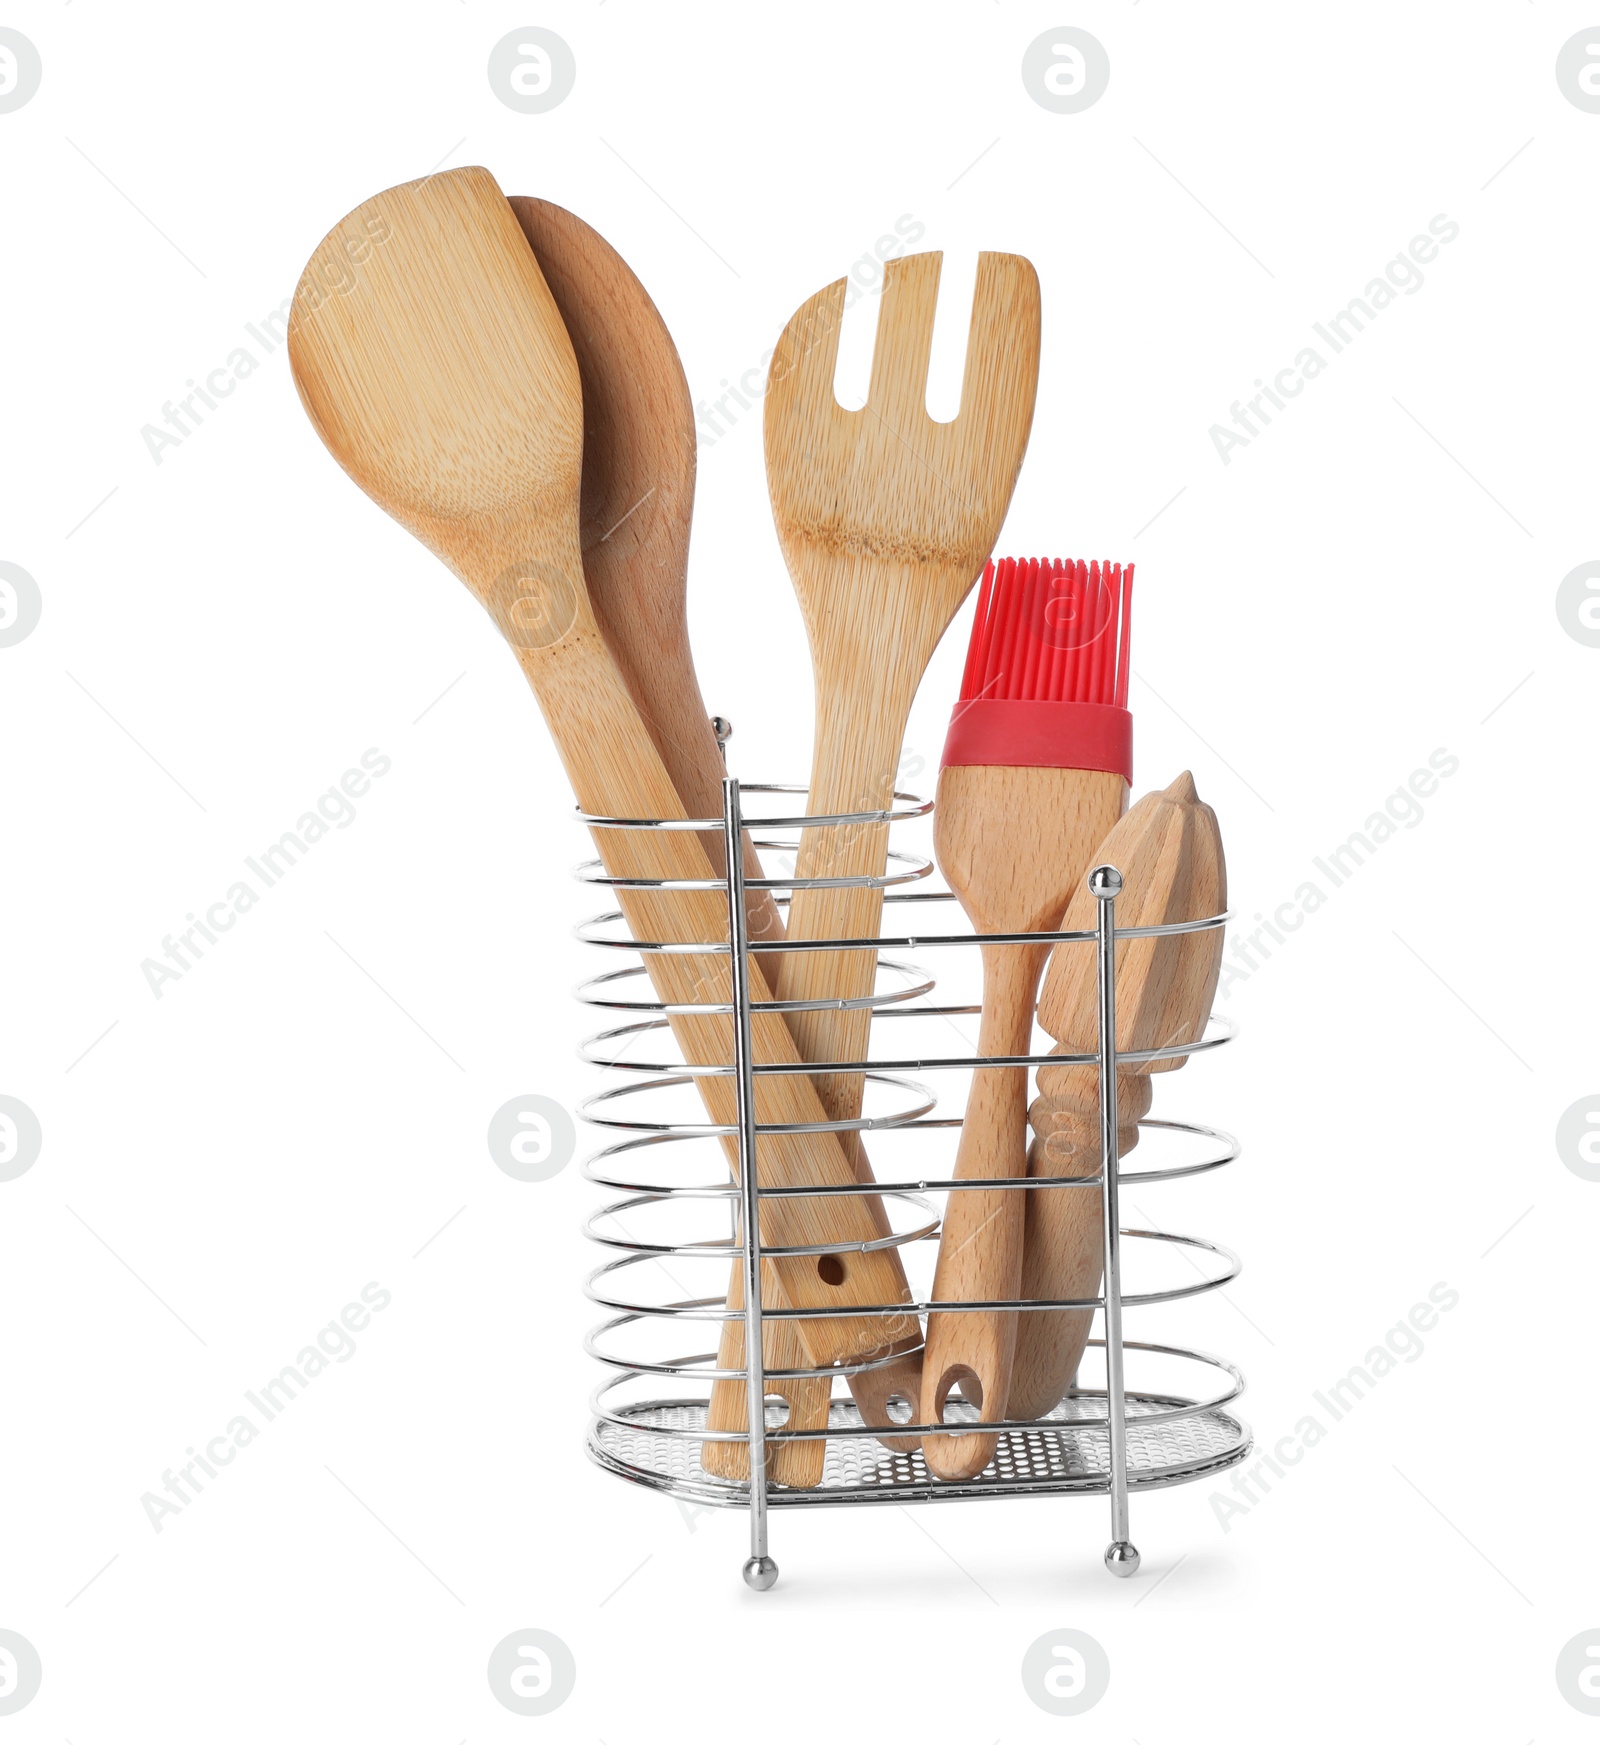 Photo of Kitchen utensils made of bamboo in stand on white background